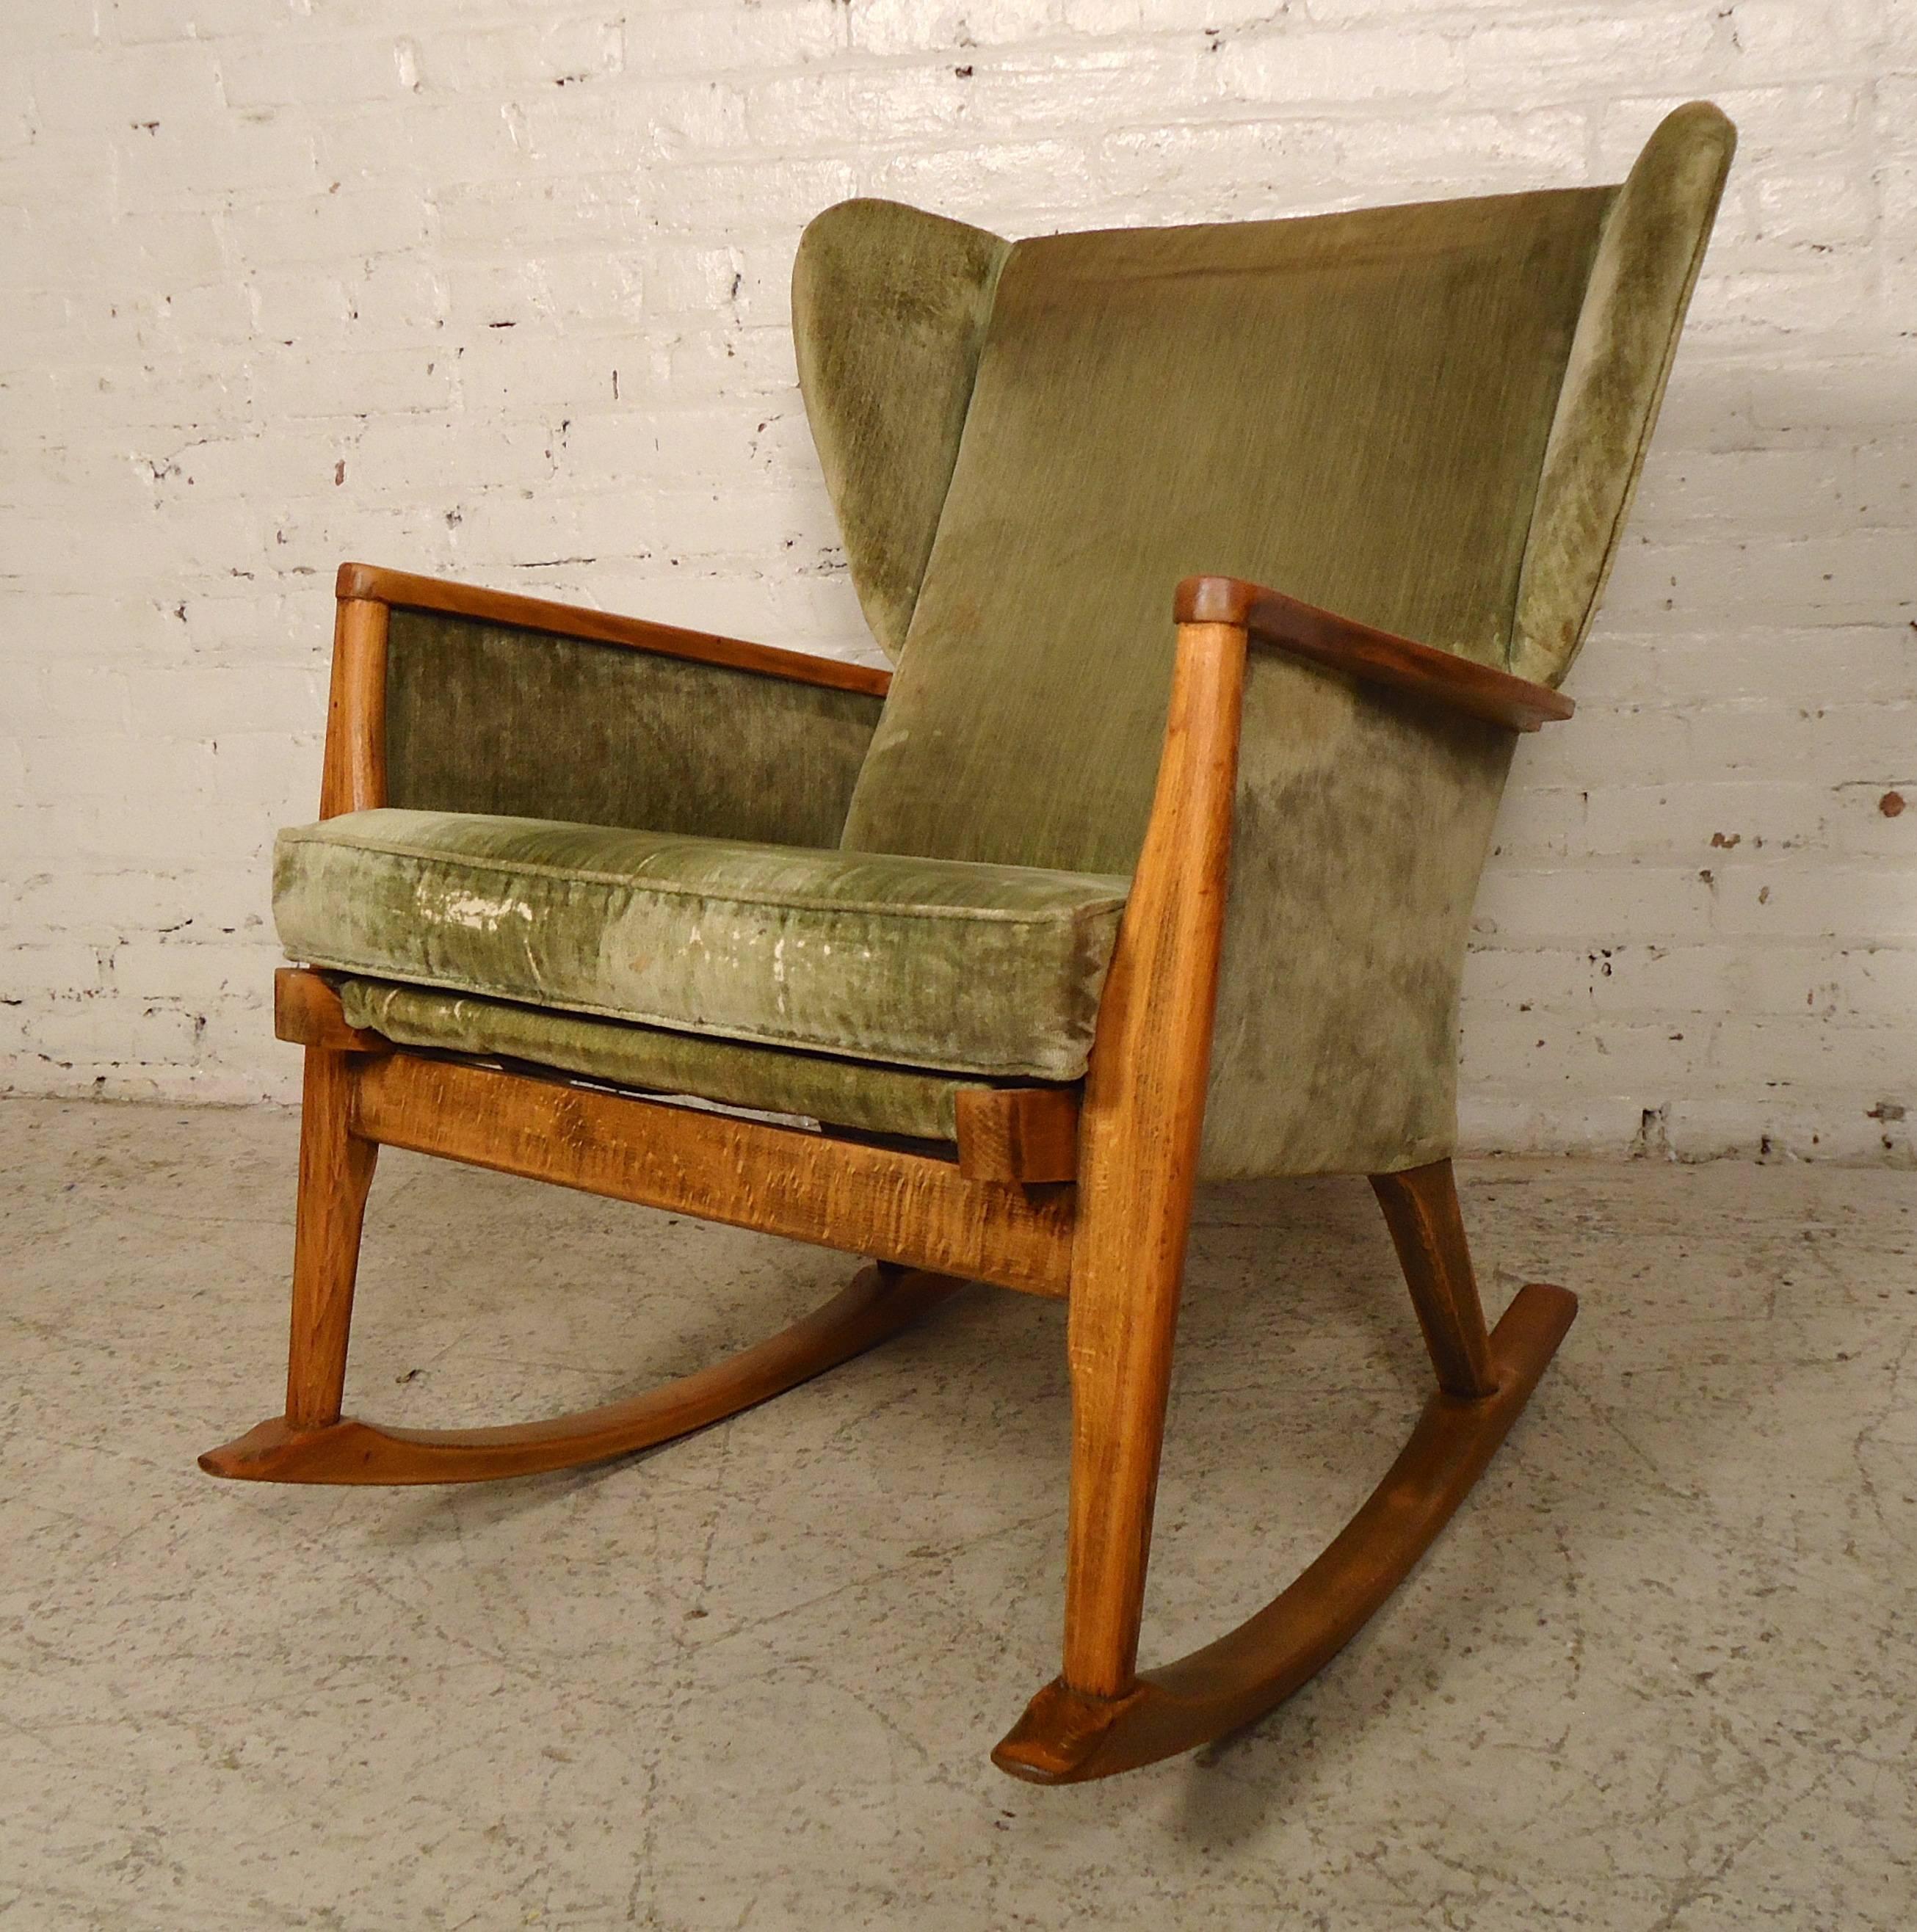 This unique rocker designed by Parker Knoll features a cushioned seat, light wood frame and wing back style back rest. Exposed wood frame has been refinished to give a nice accent.

(Please confirm item location - NY or NJ - with dealer).